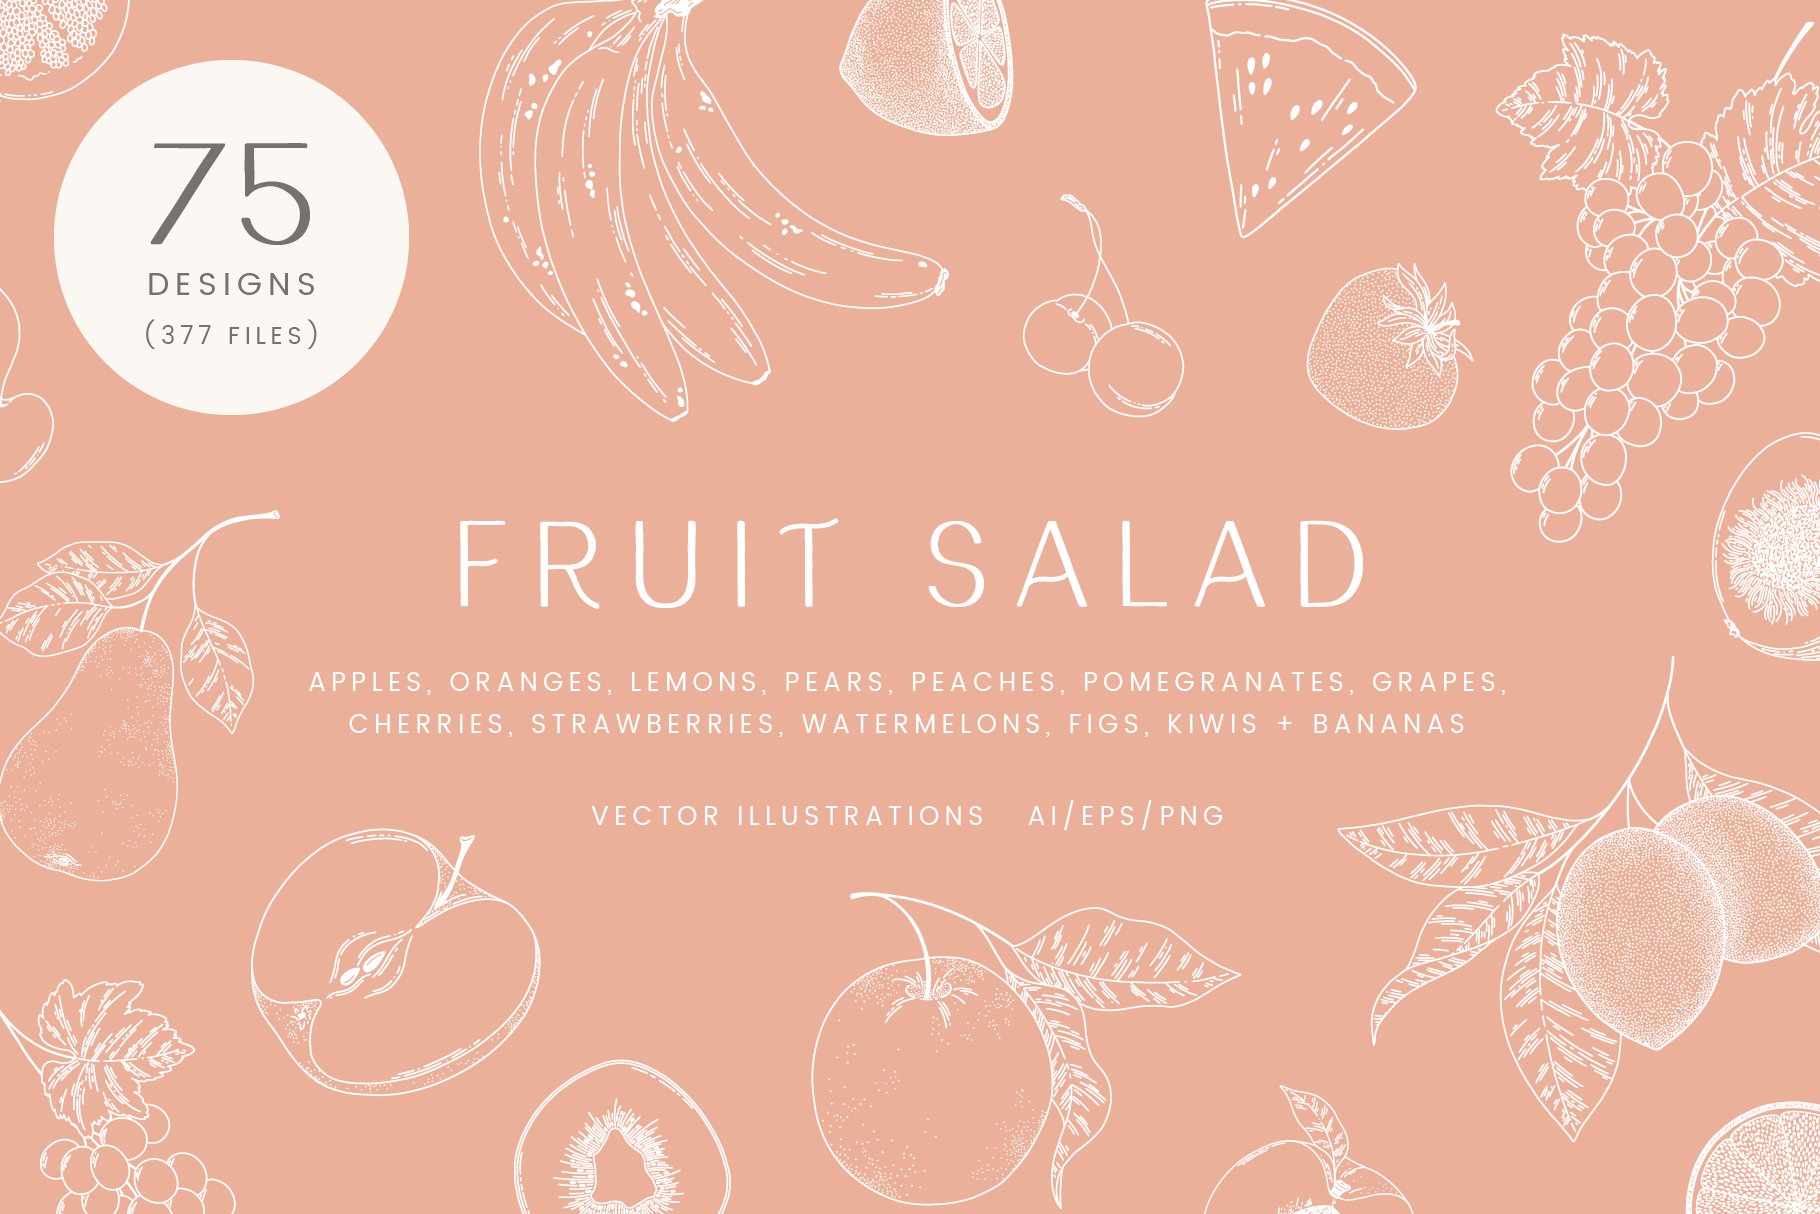 Fruit Salad Vector Illustrations cover image.